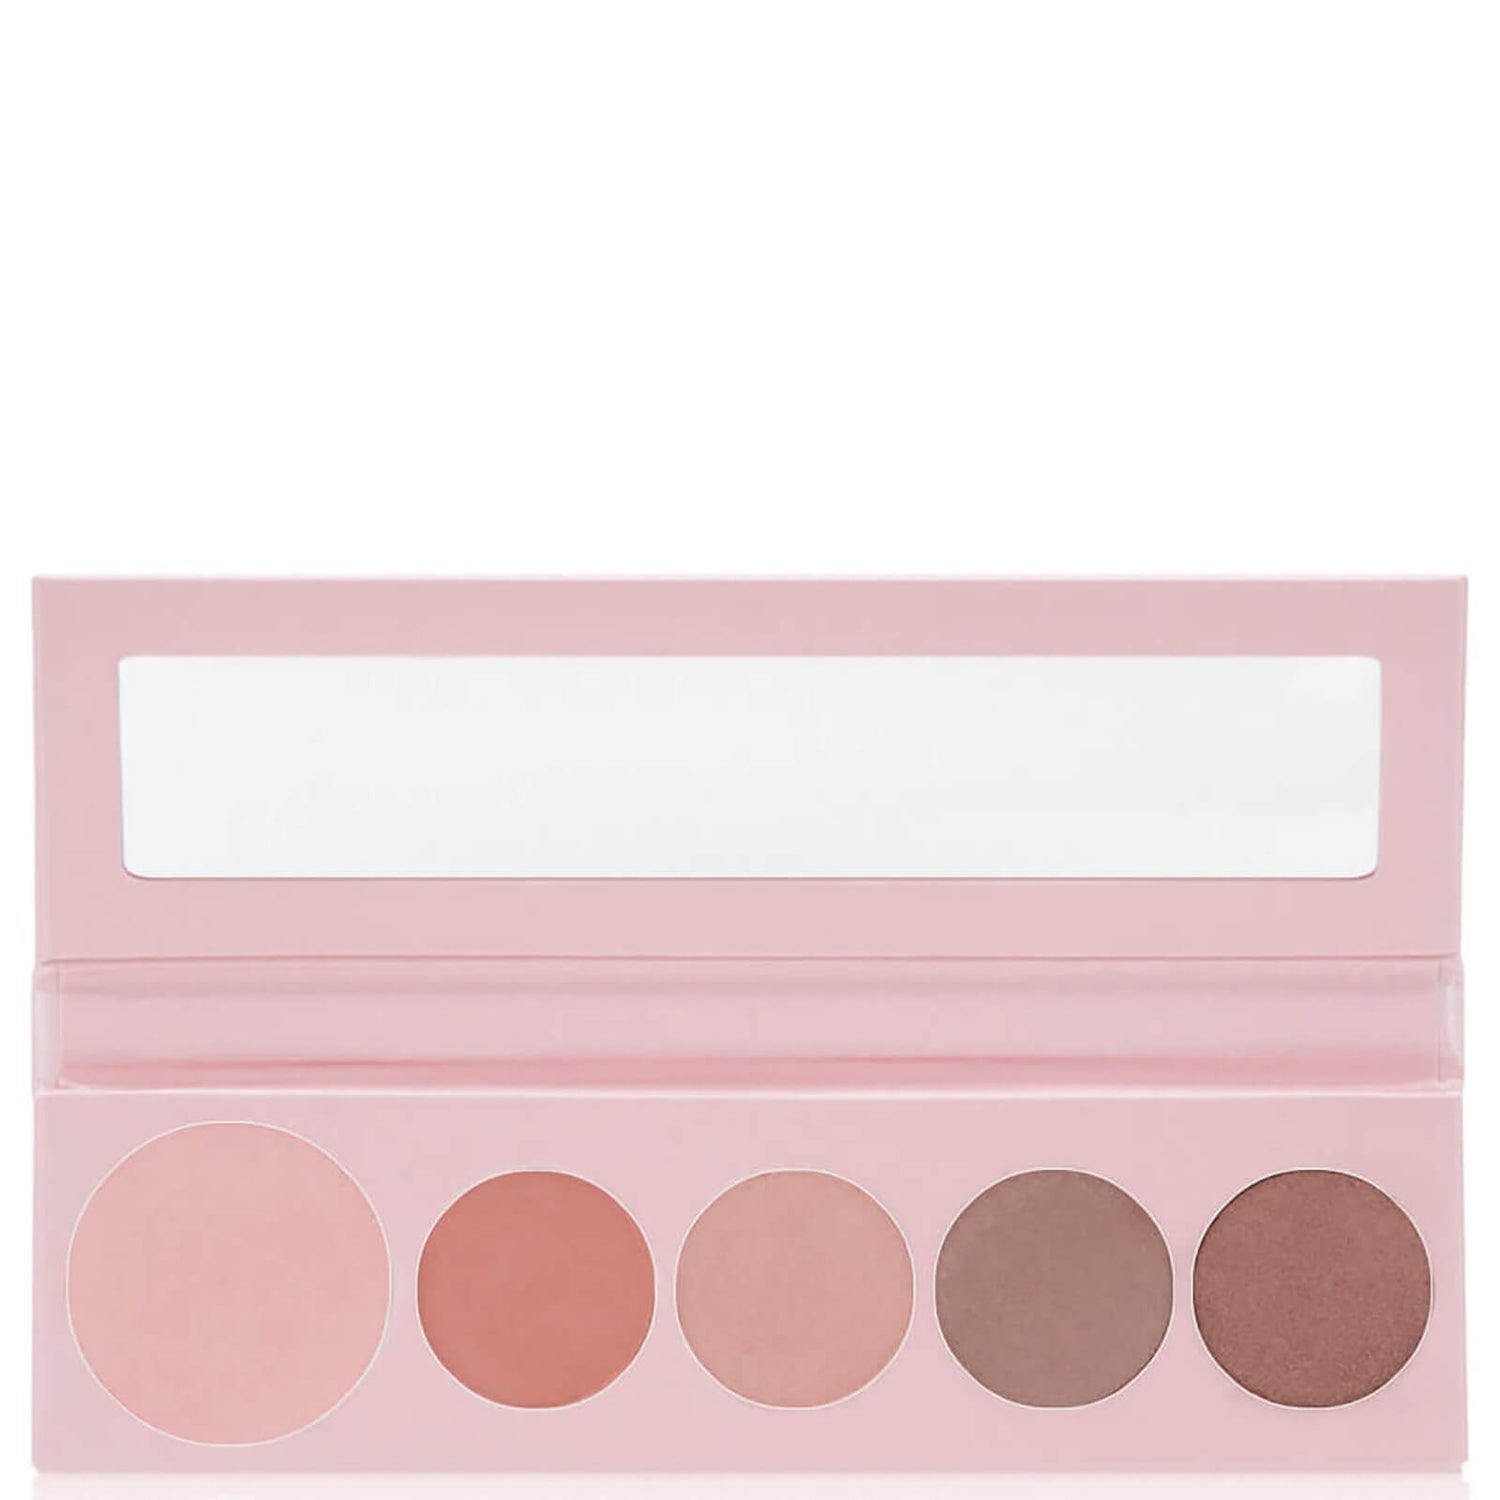 100% Pure Pretty Naked Face Palette (1 piece)